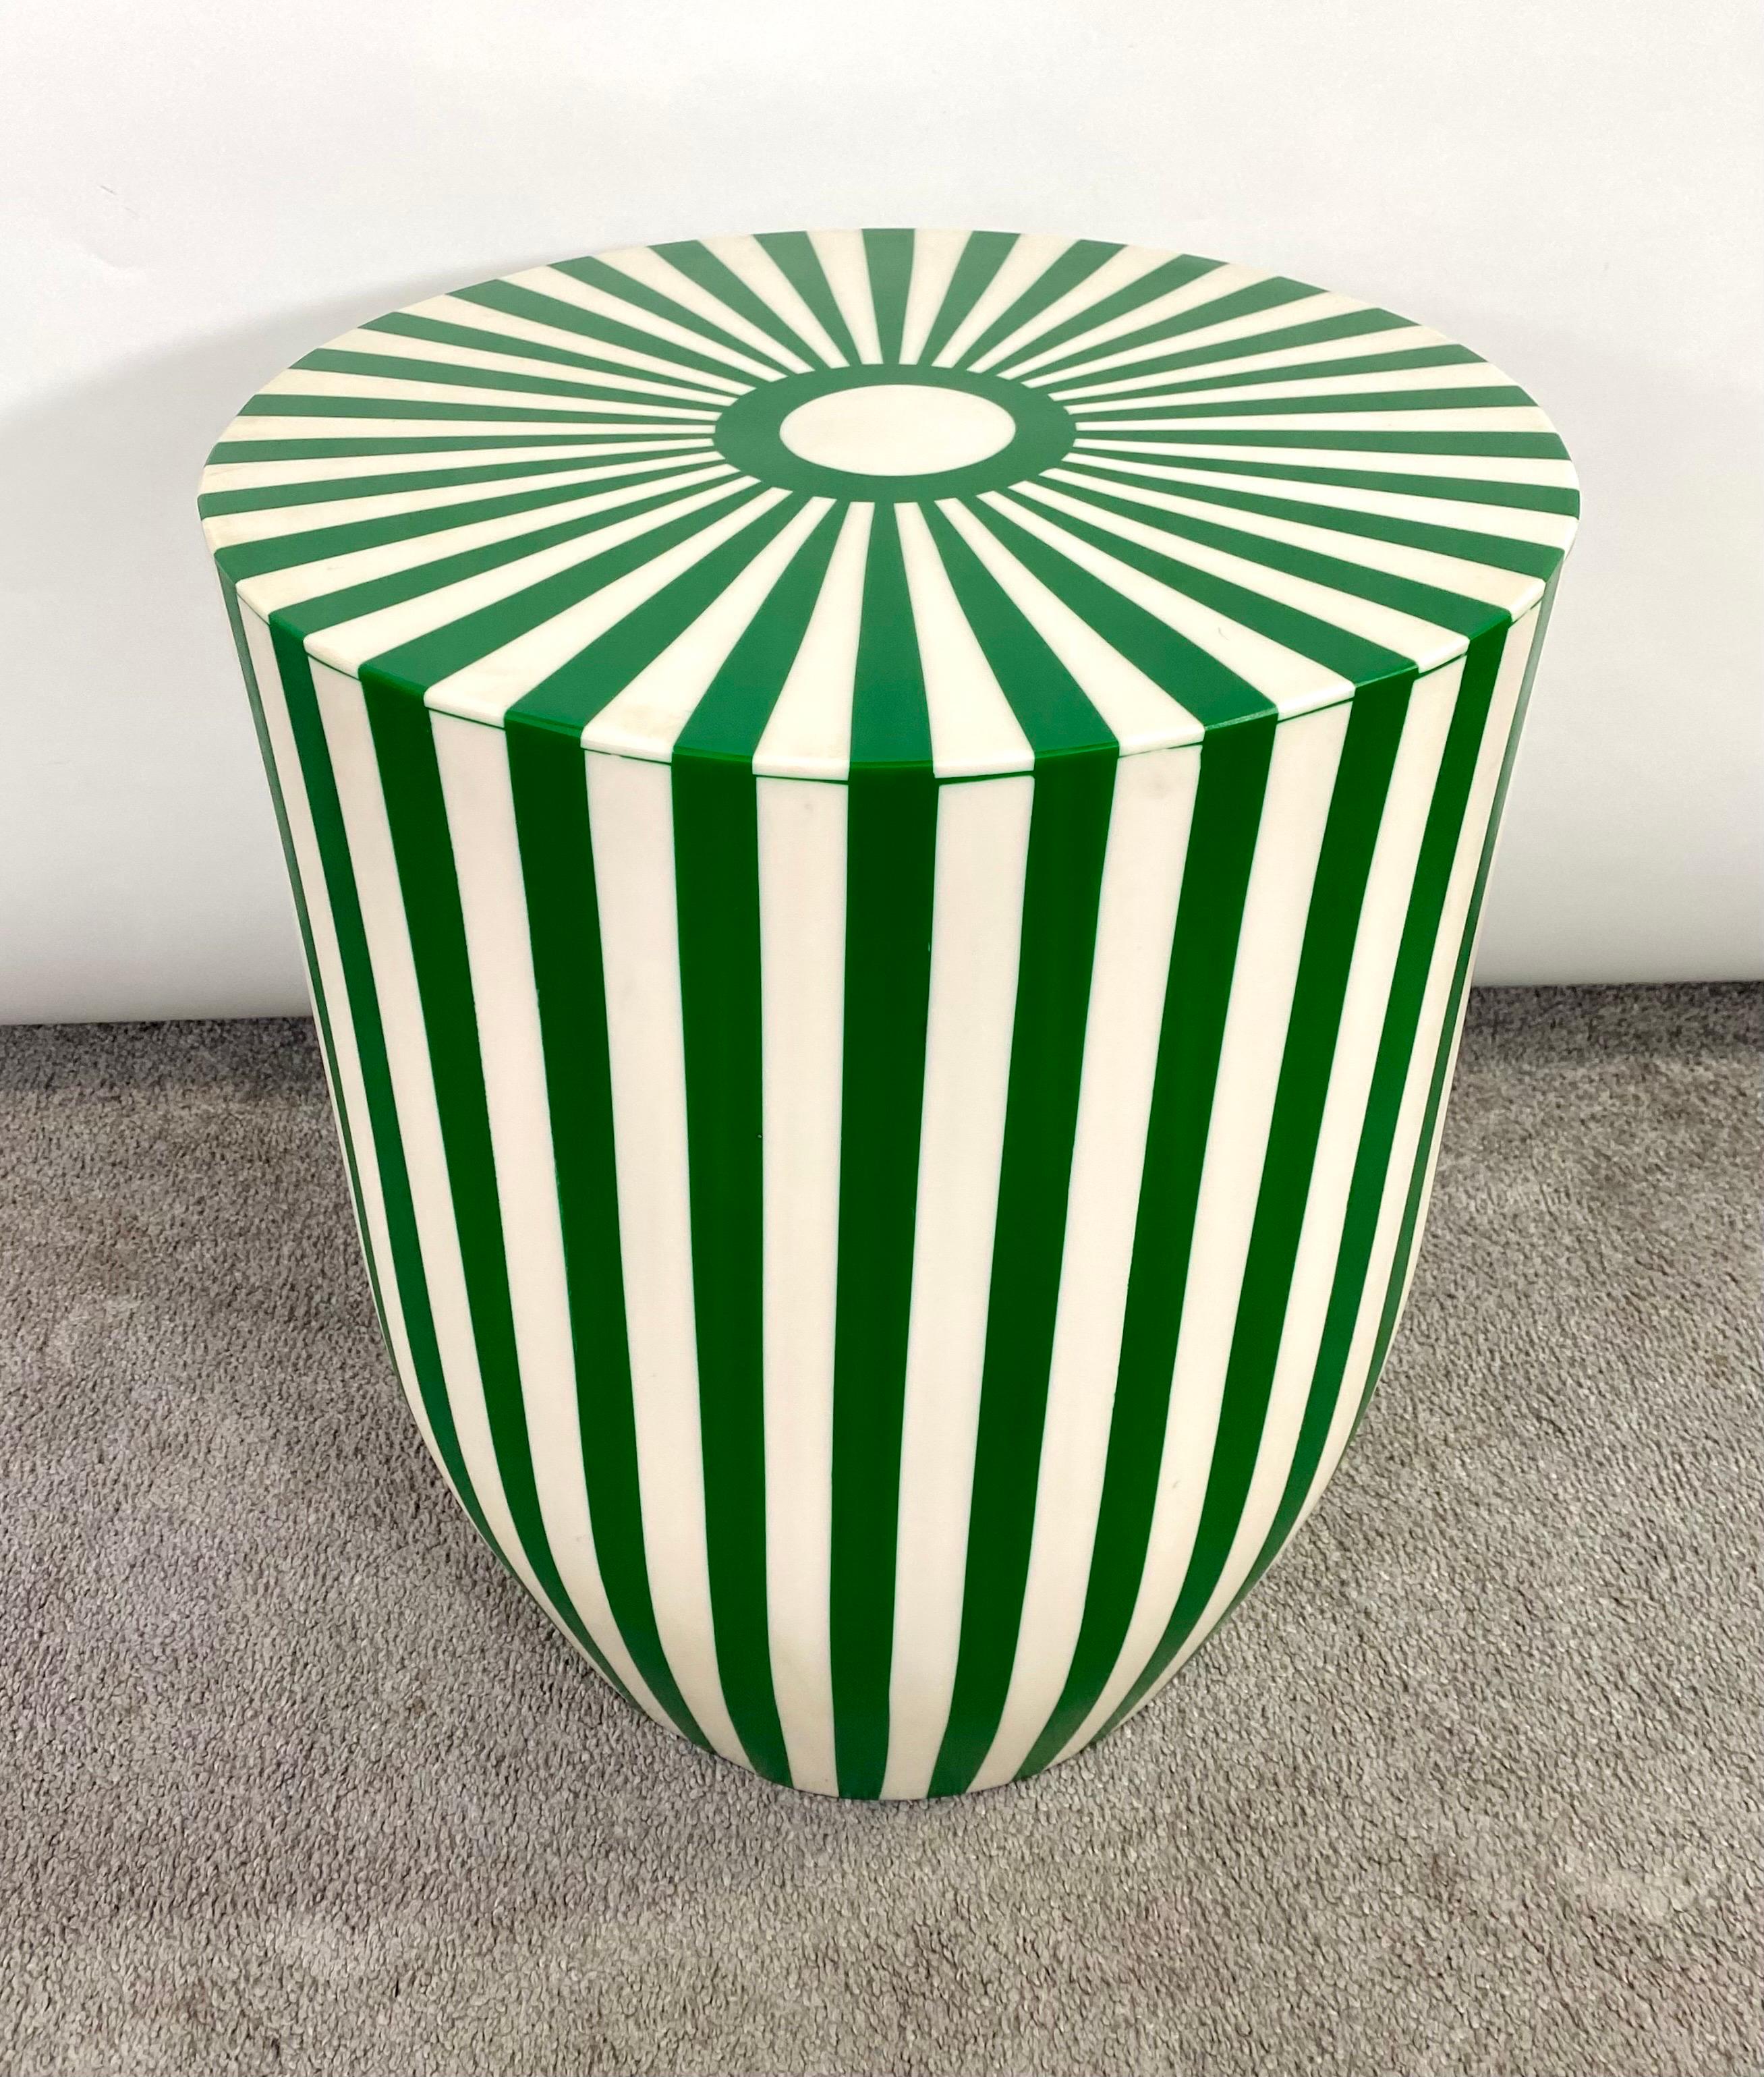 Art Deco Style Green & White Resin Side, End Table or Stool, a Pair For Sale 2